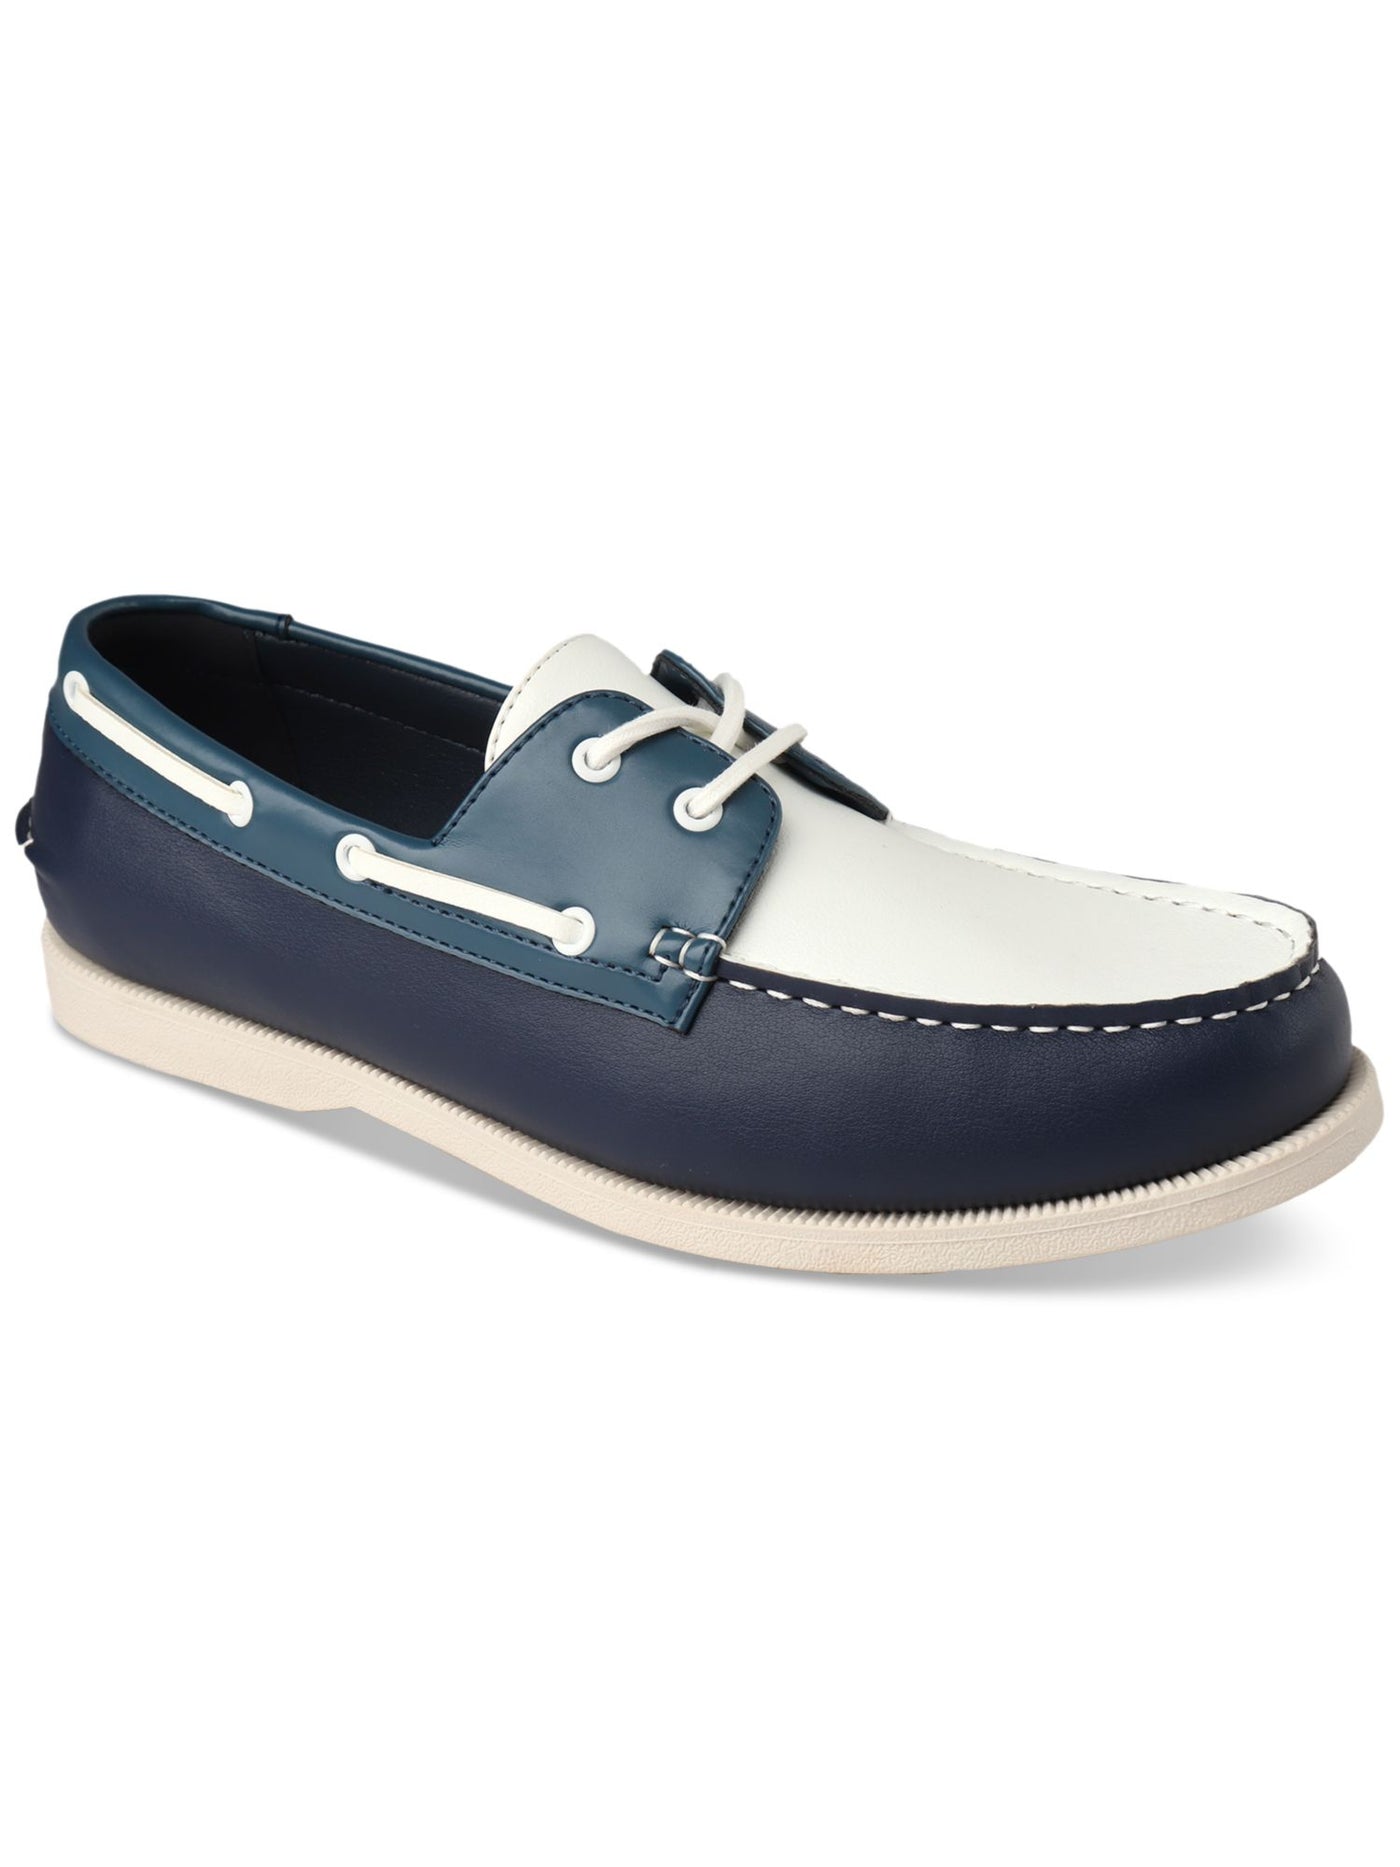 CLUBROOM Mens Navy Moc Toe Comfort Elliot Round Toe Lace-Up Boat Shoes 12 M